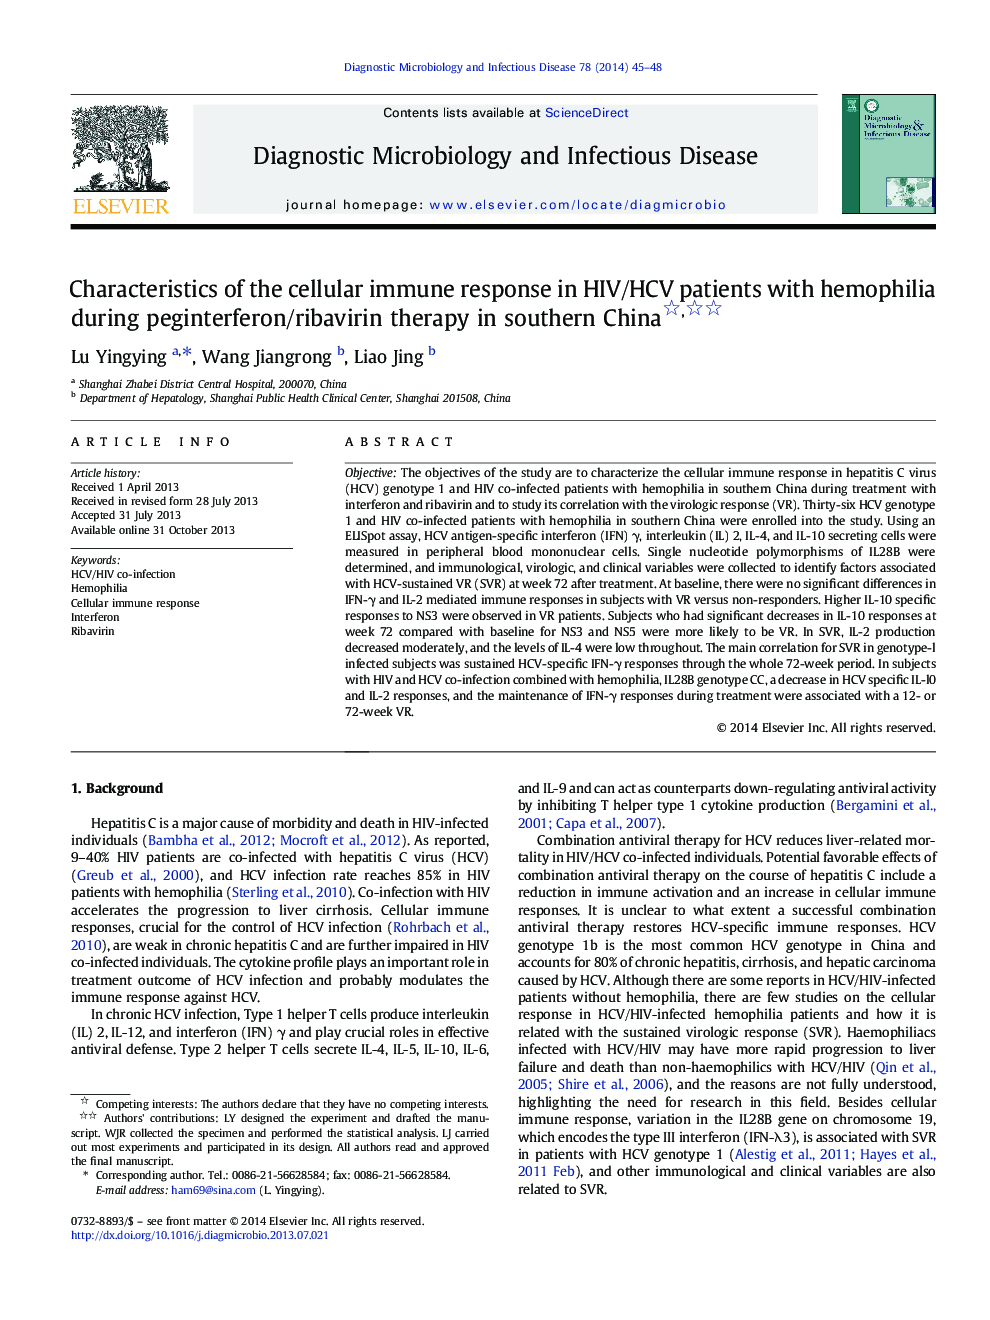 Characteristics of the cellular immune response in HIV/HCV patients with hemophilia during peginterferon/ribavirin therapy in southern China 